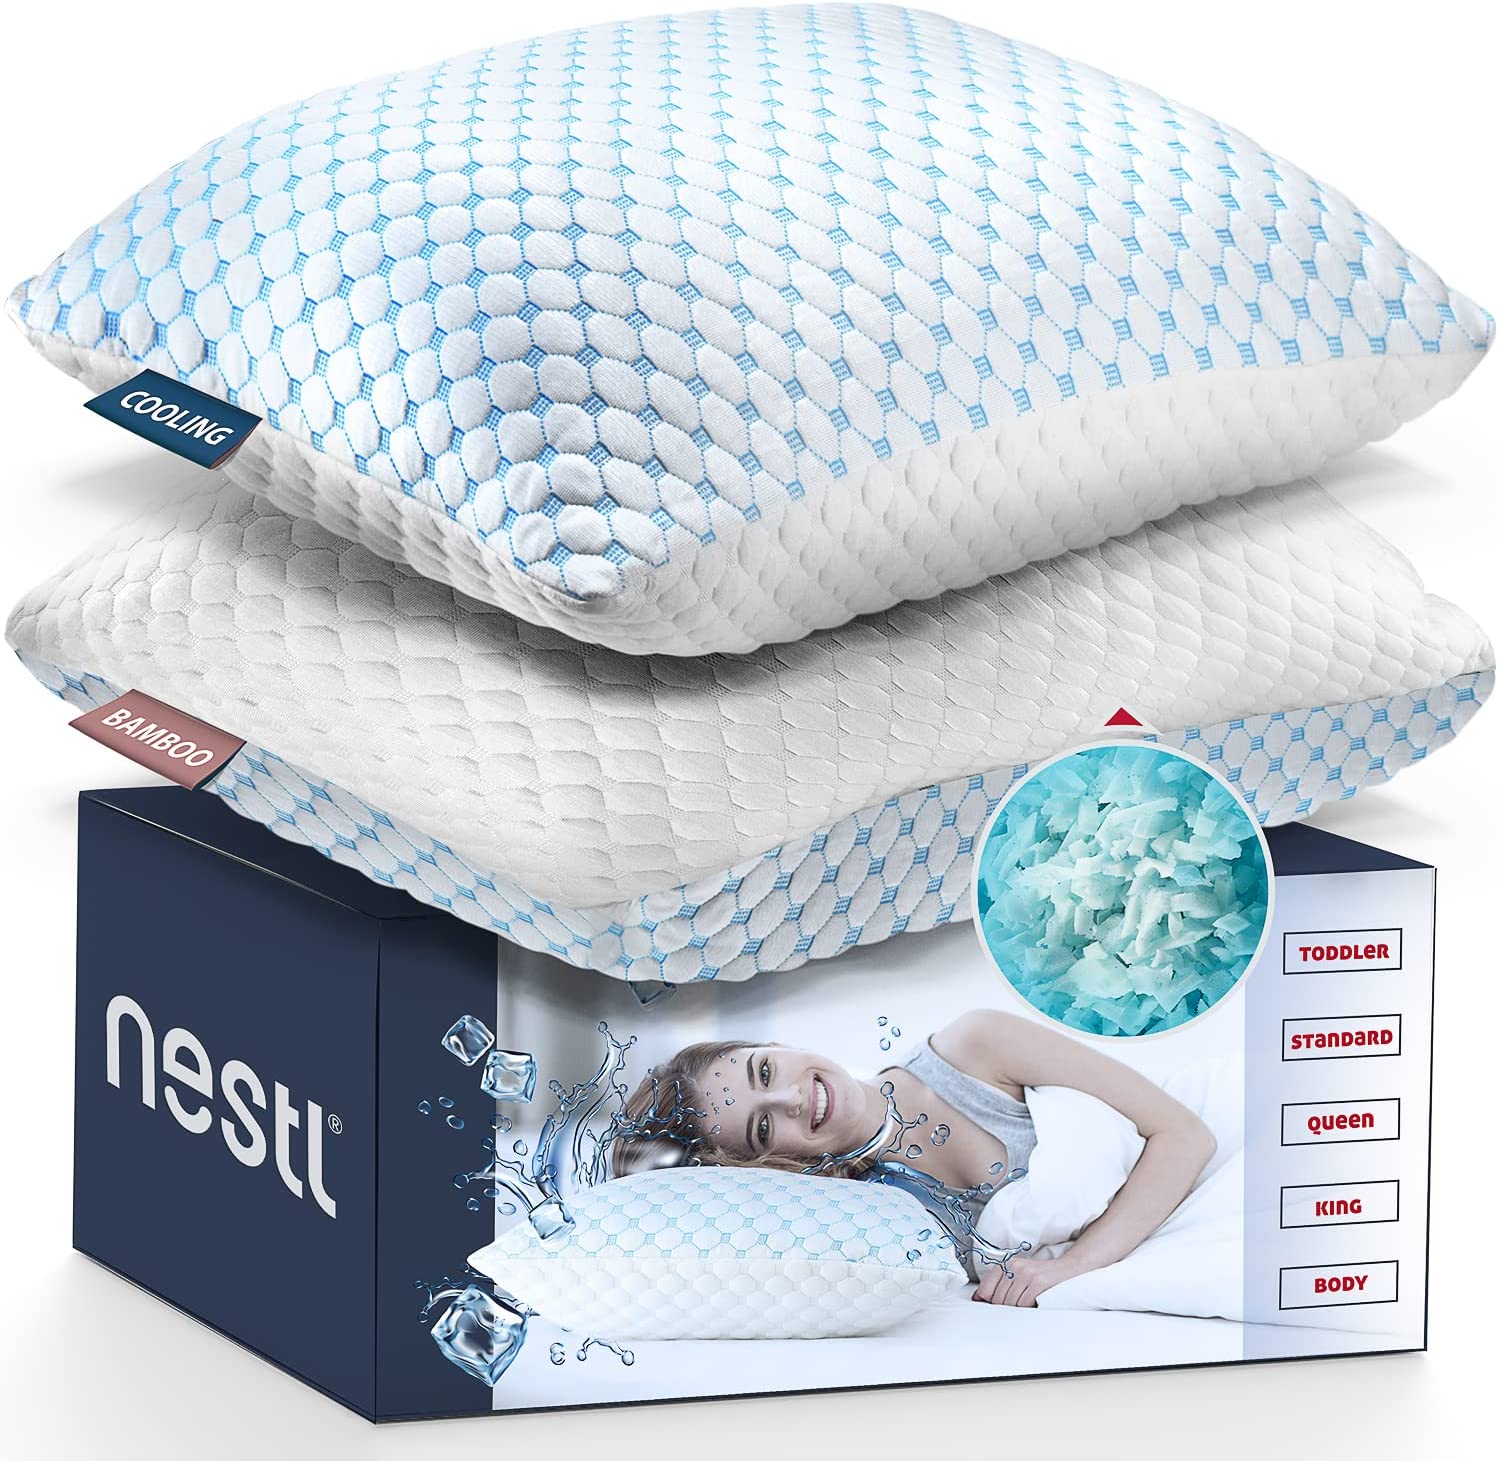 Nestl Double-Sided Customizable Gel Pillows, 2-Pack